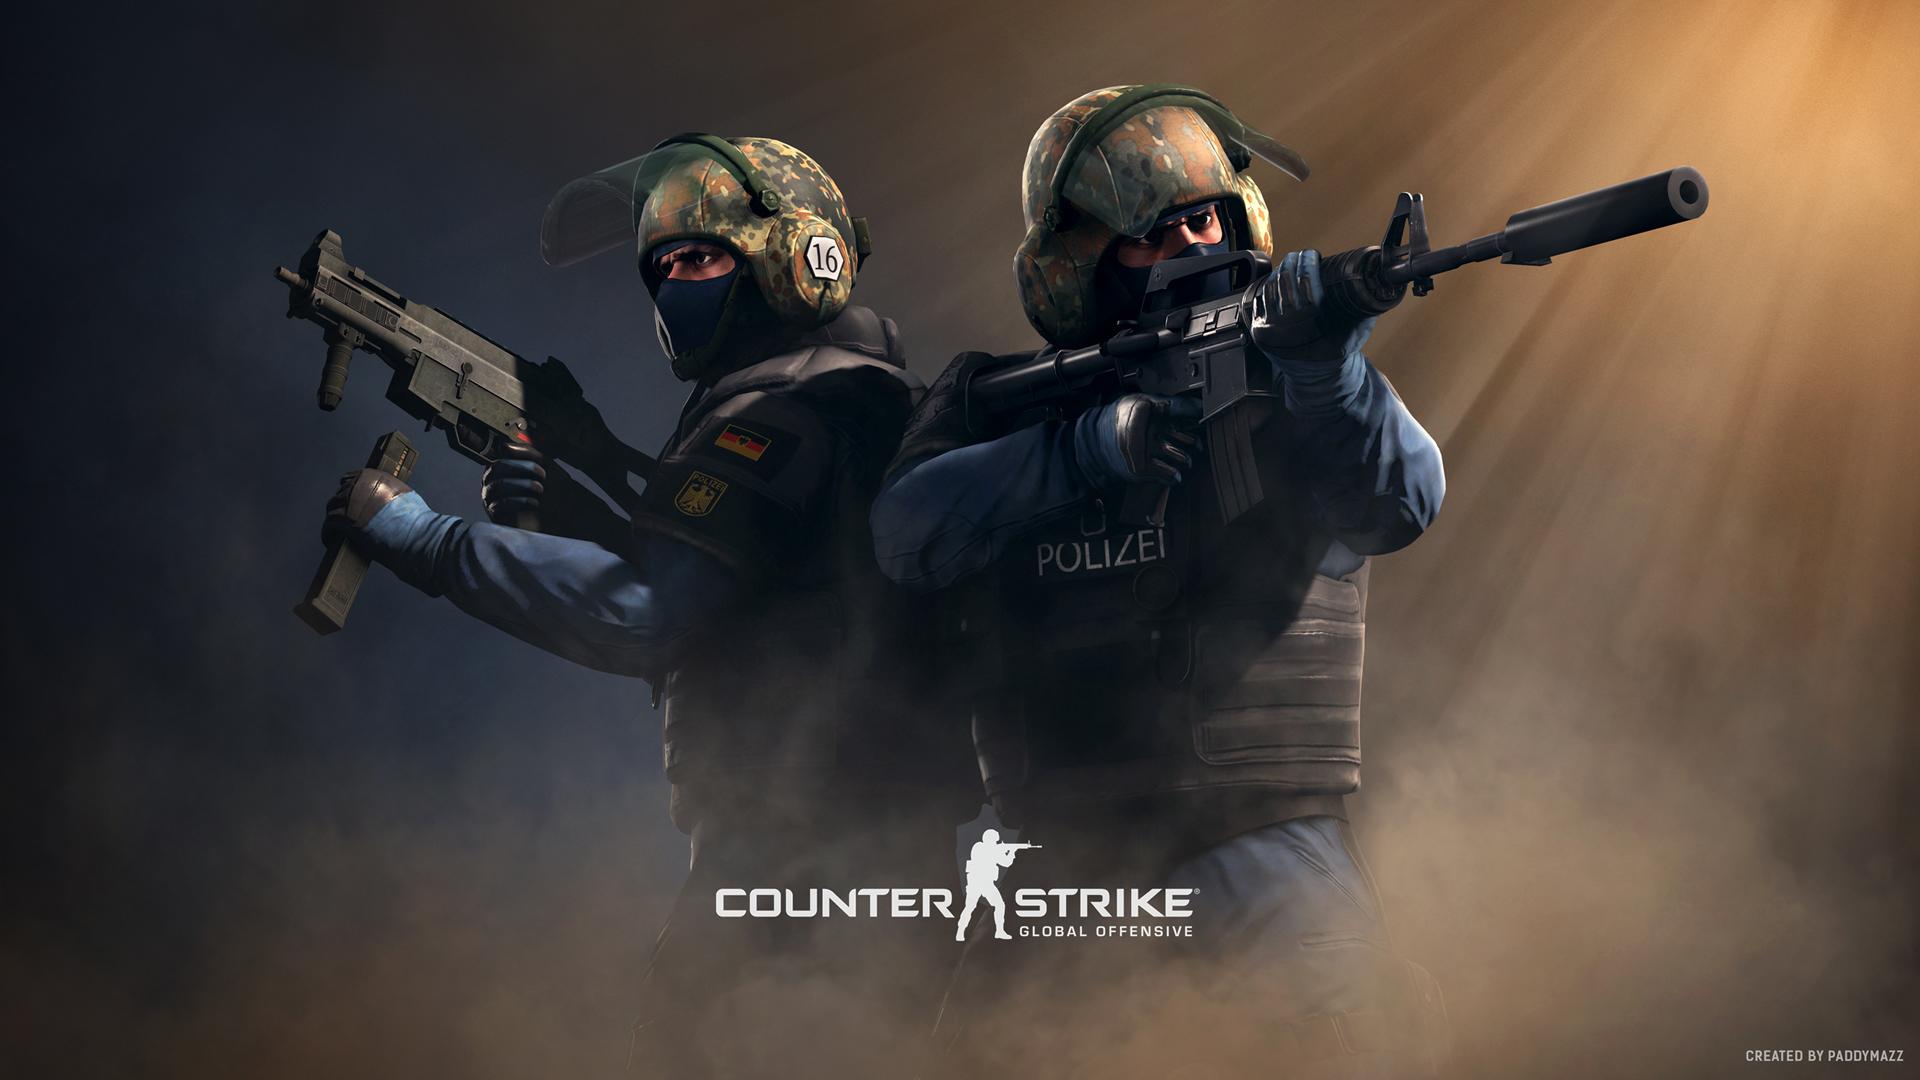 counter strike wallpaper,action adventure game,shooter game,pc game,personal protective equipment,movie